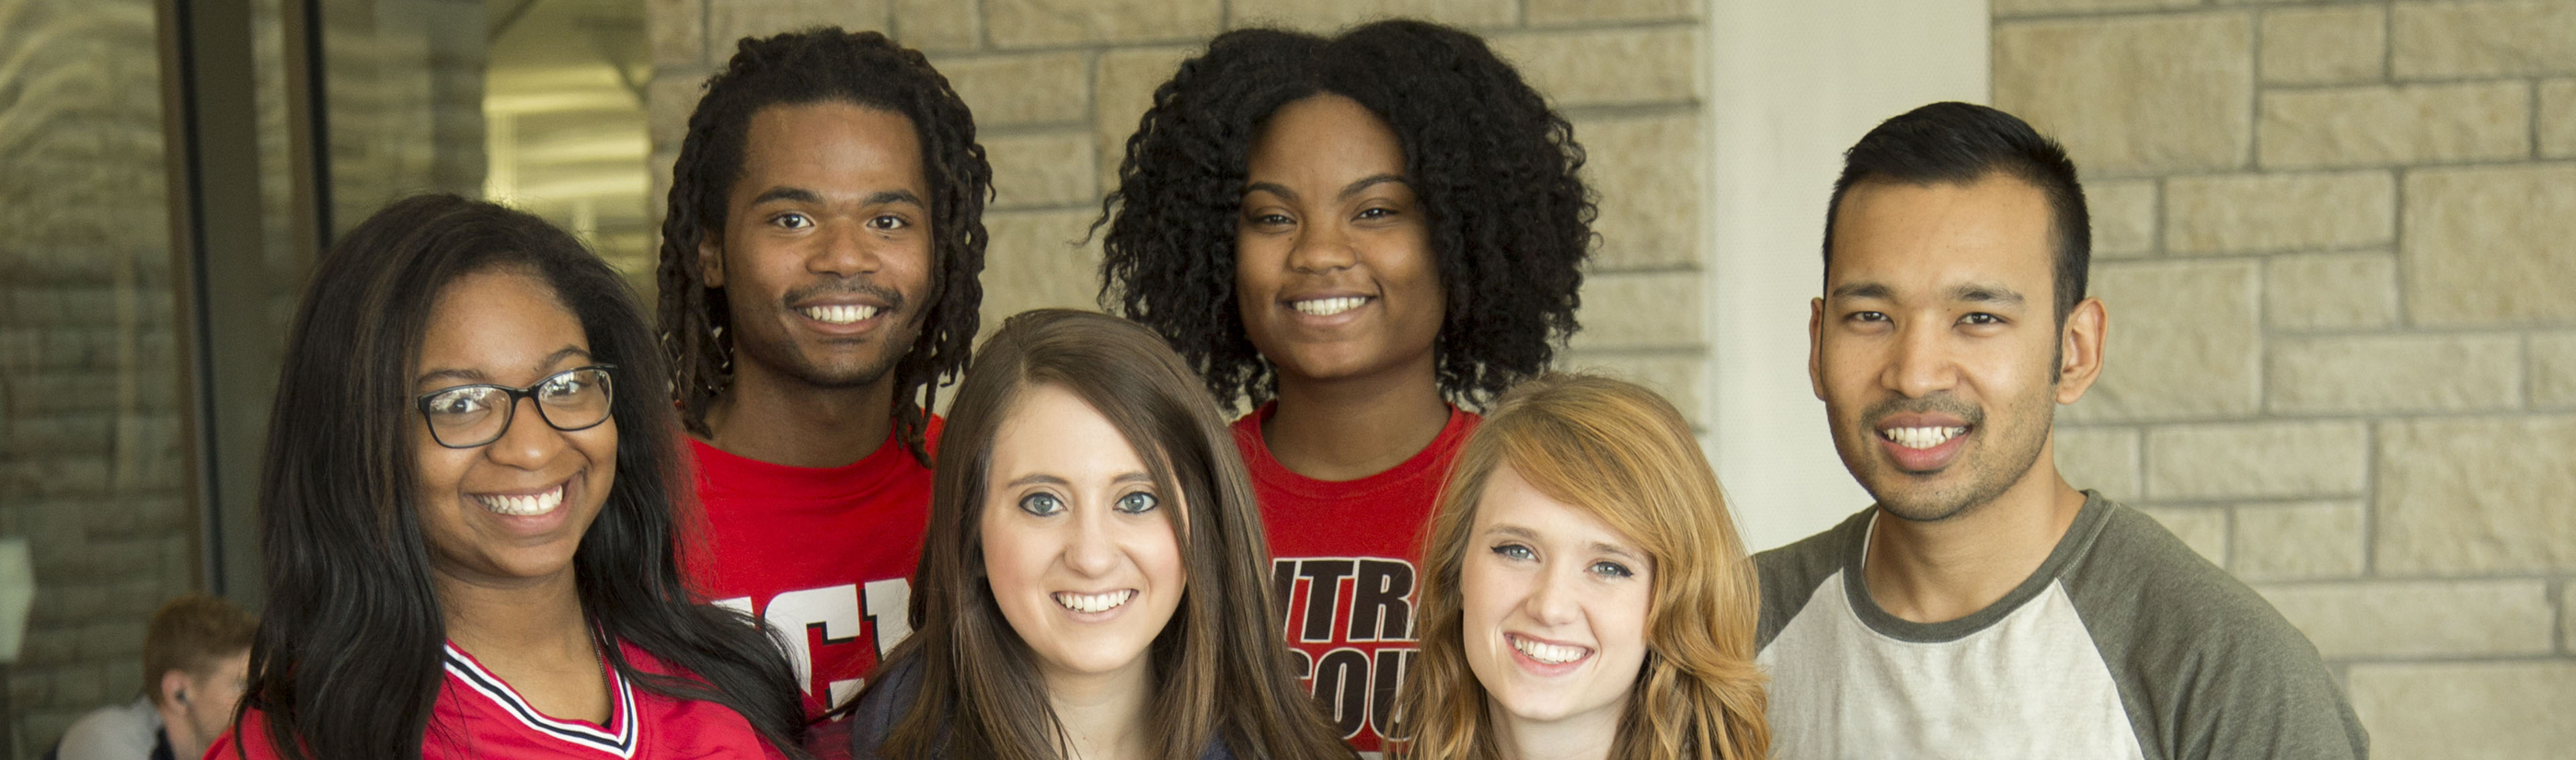 Six UCM students smiling for camera